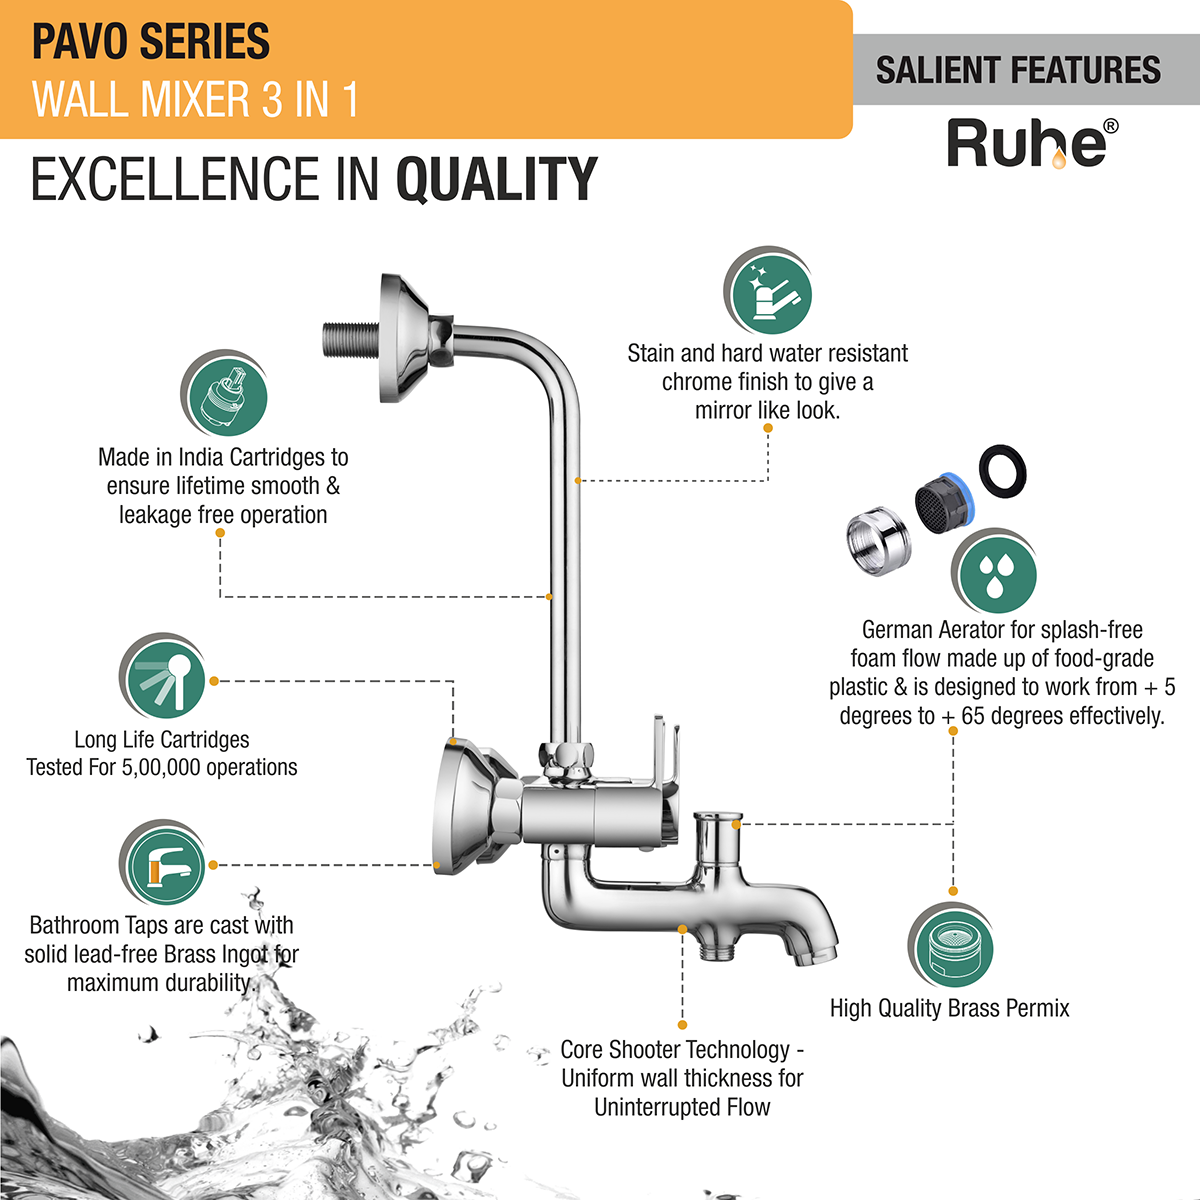 Pavo Wall Mixer 3-in-1 Brass Faucet features